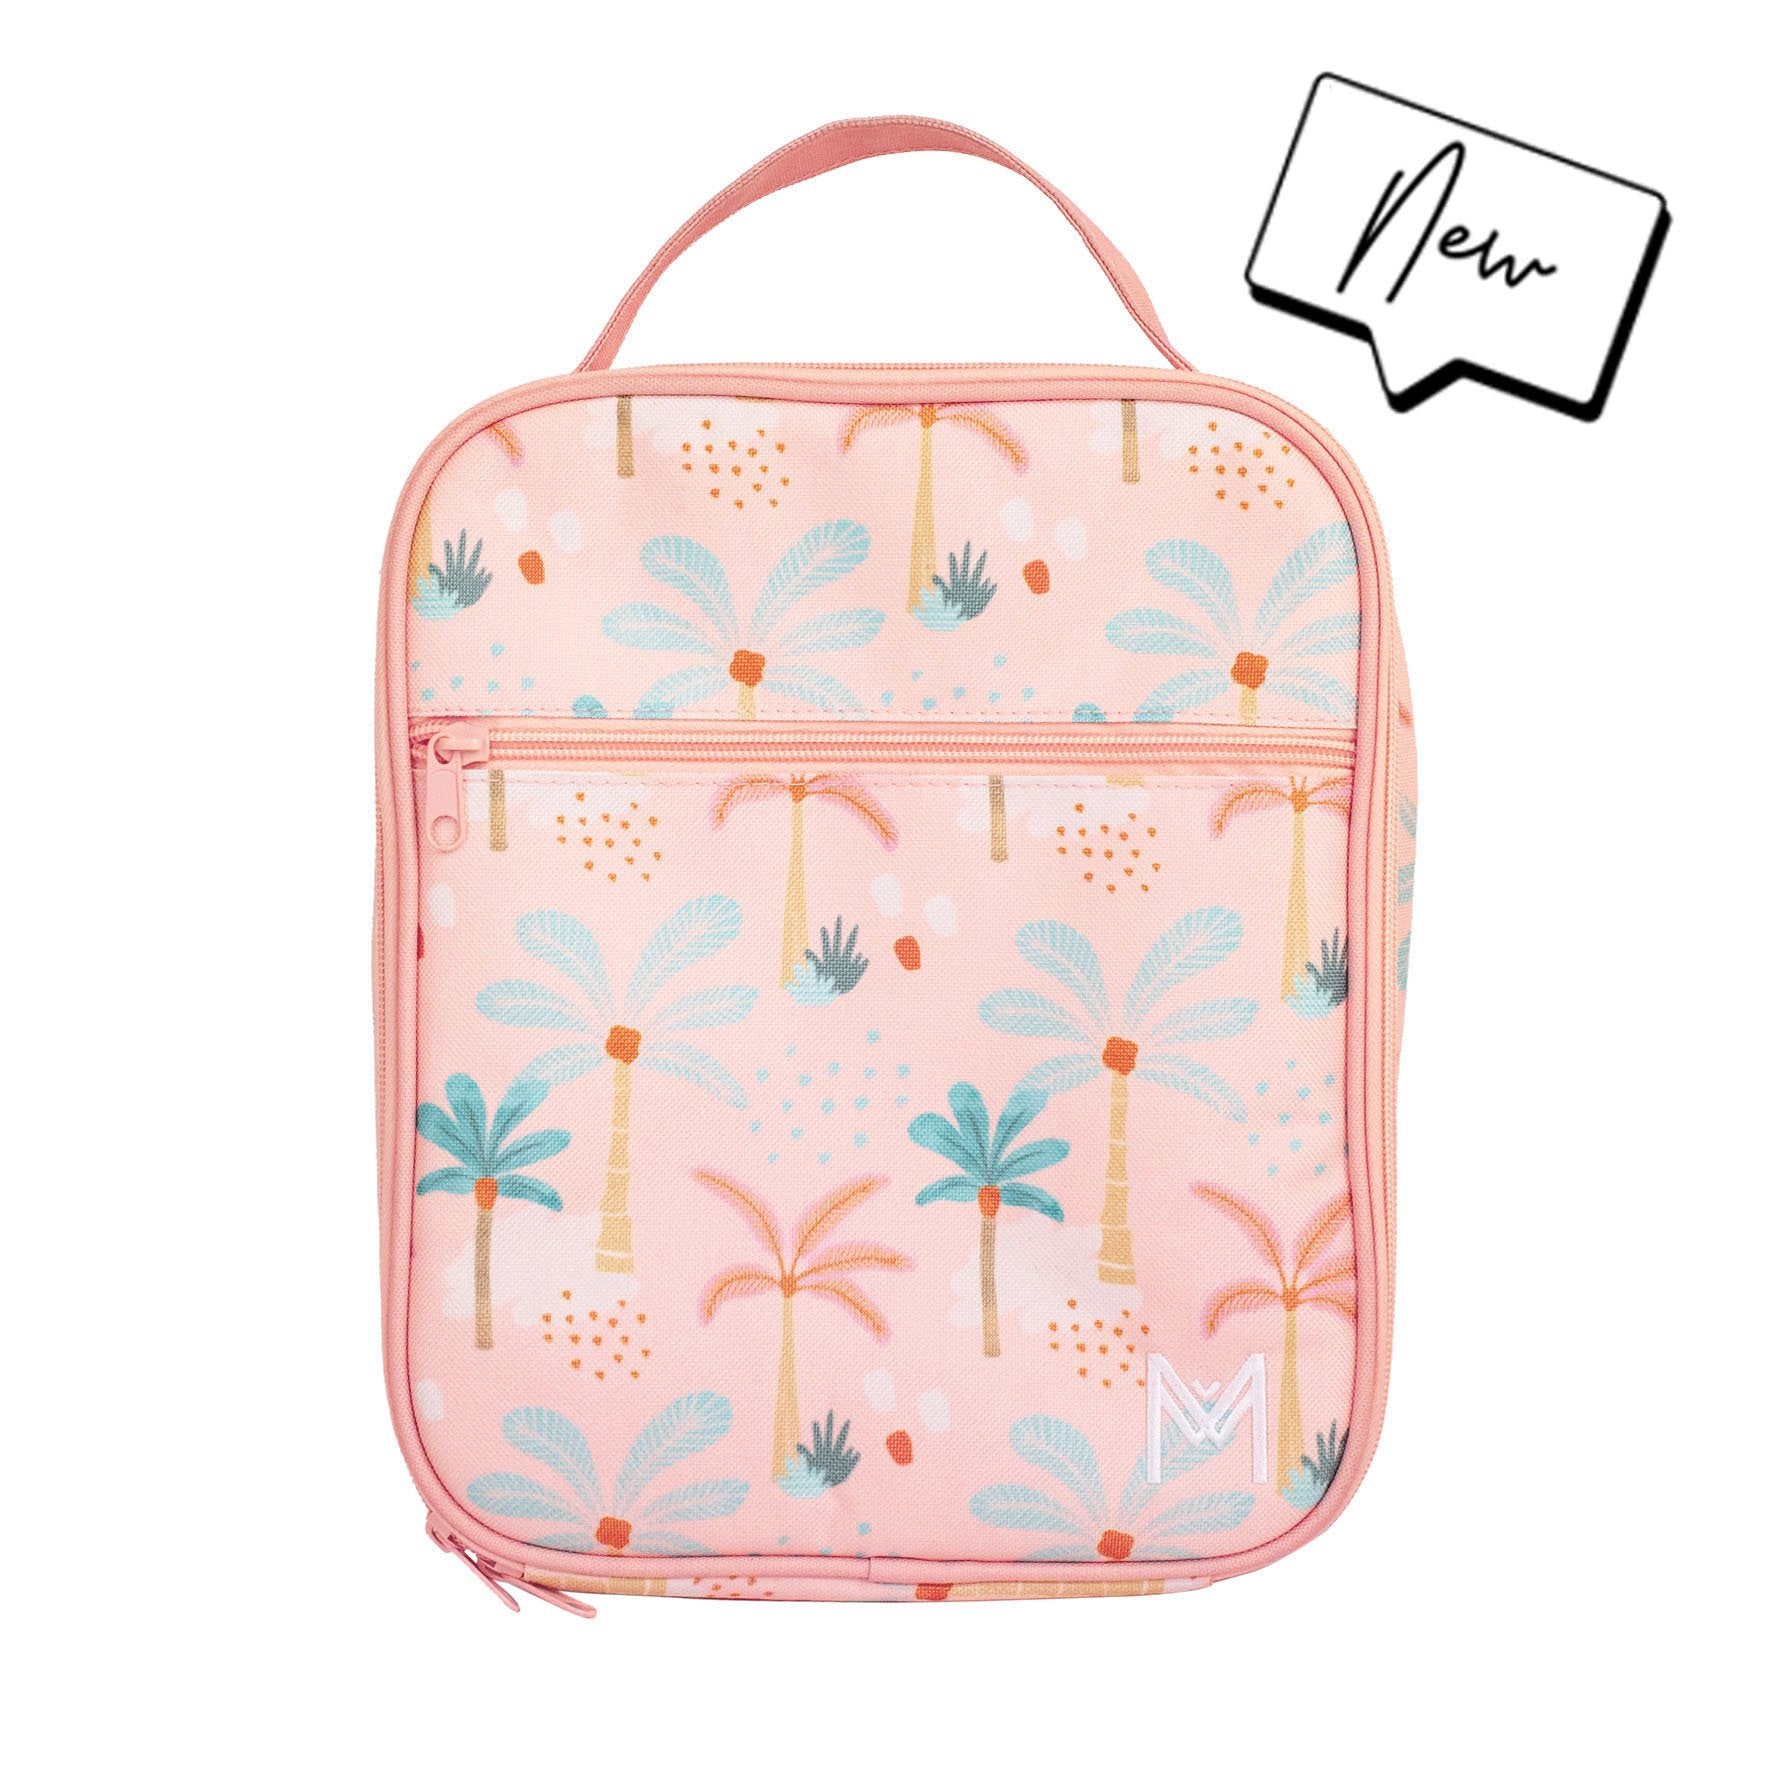 MontiiCo Insulated Lunch Bag - Boho Palms - Urban Naturals